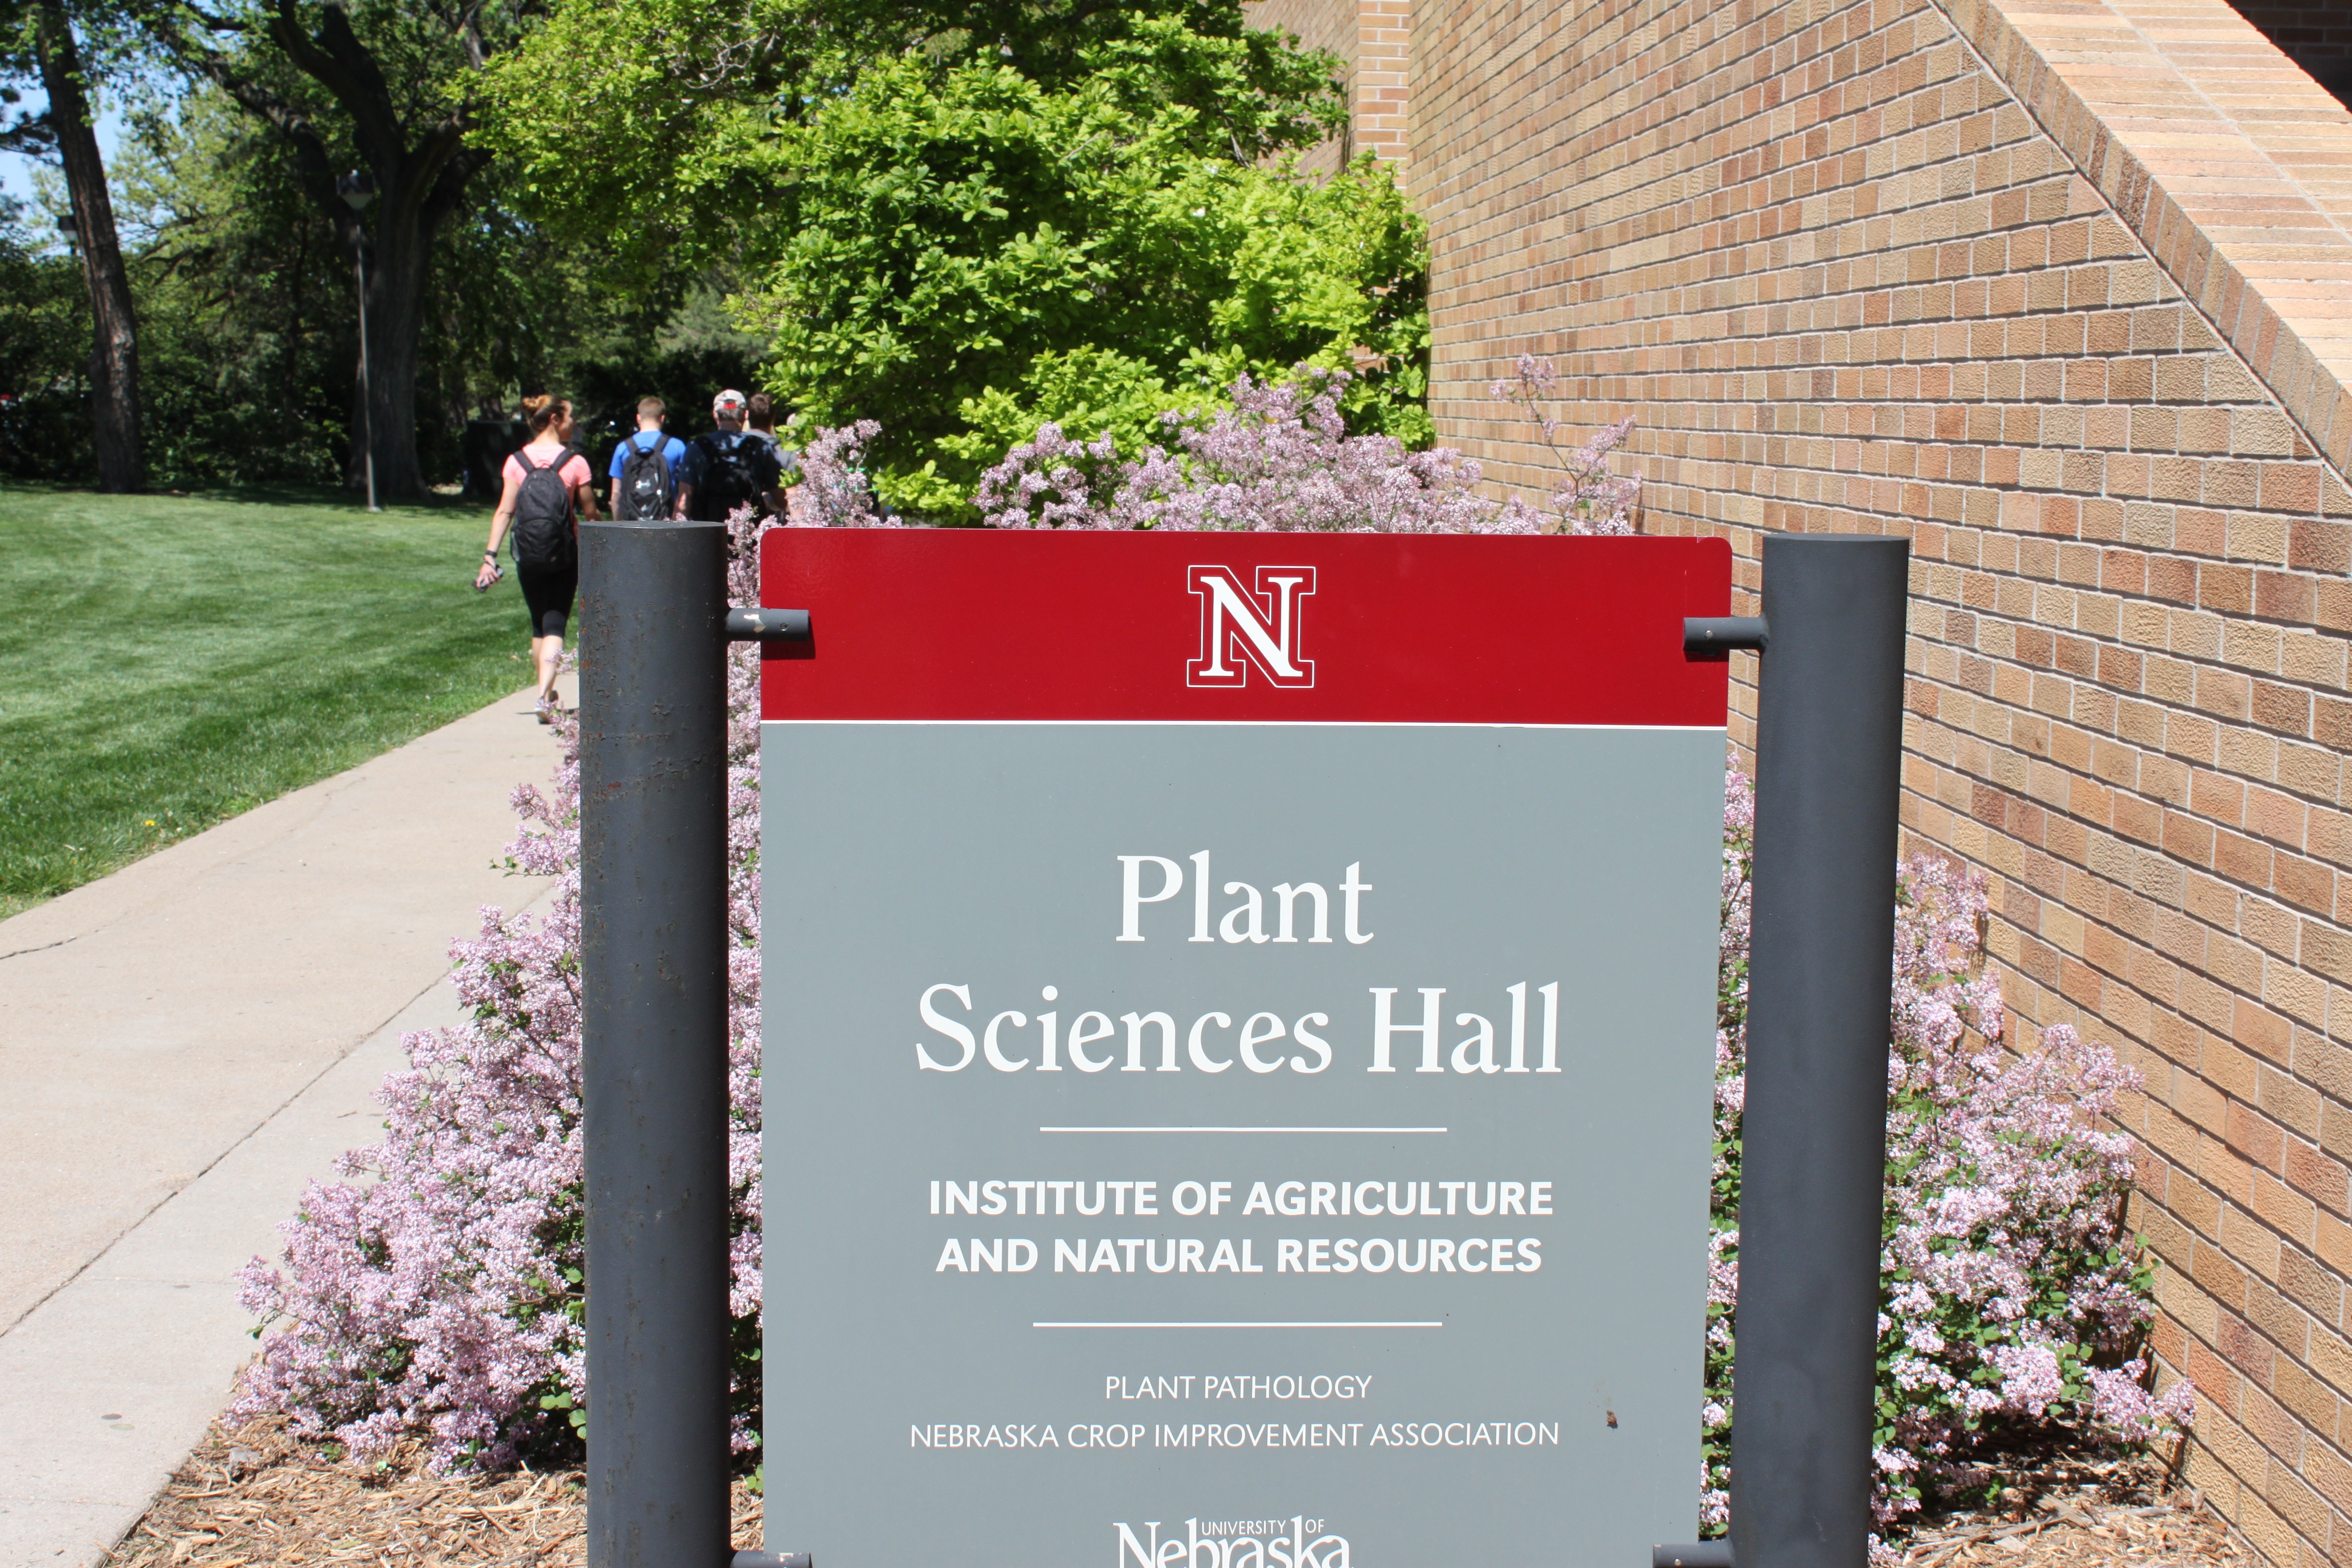 Forty Agronomy and Horticulture students make CASNR Dean's List.